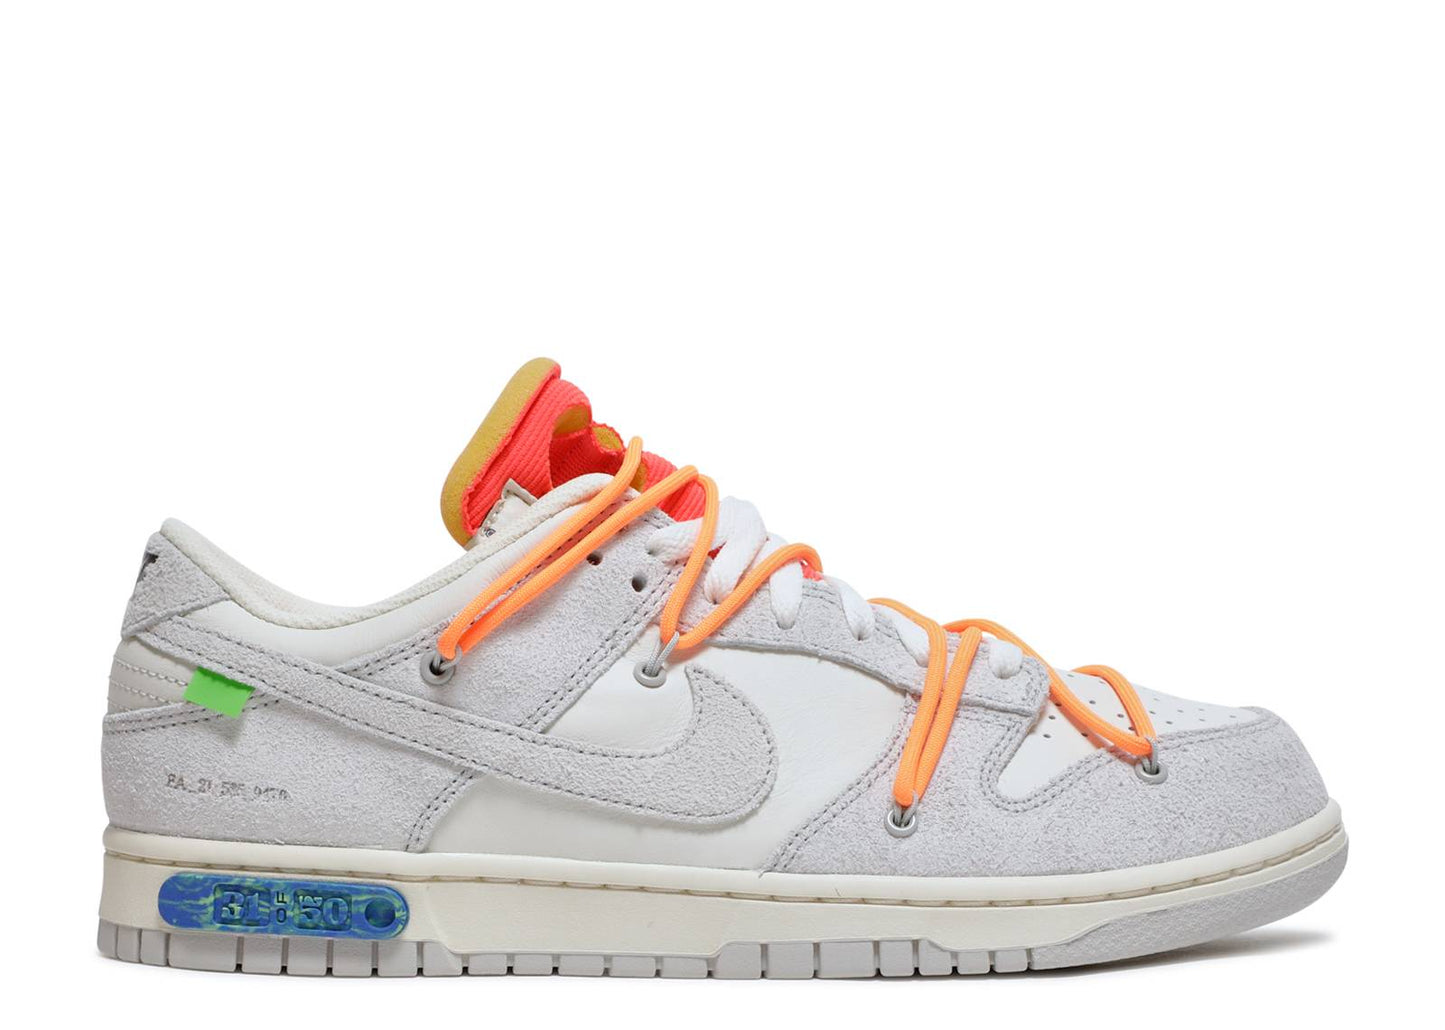 Off-White x Nike Dunk Low "Dear Summer - Lot 31 of 50"